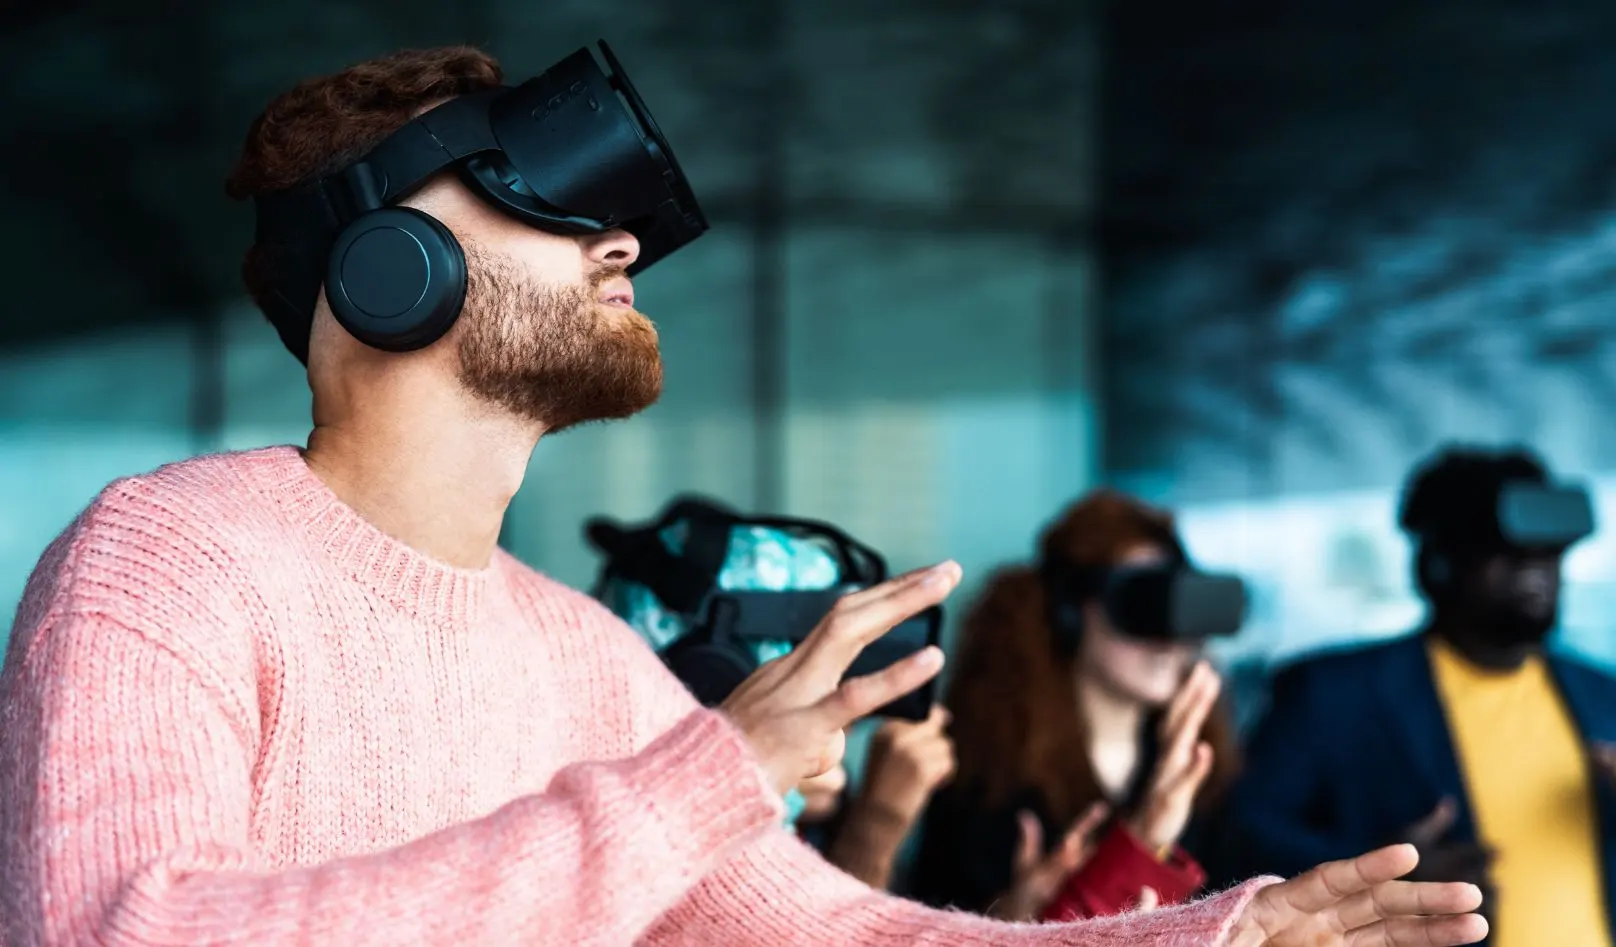 Business of immersive VR and AR experience